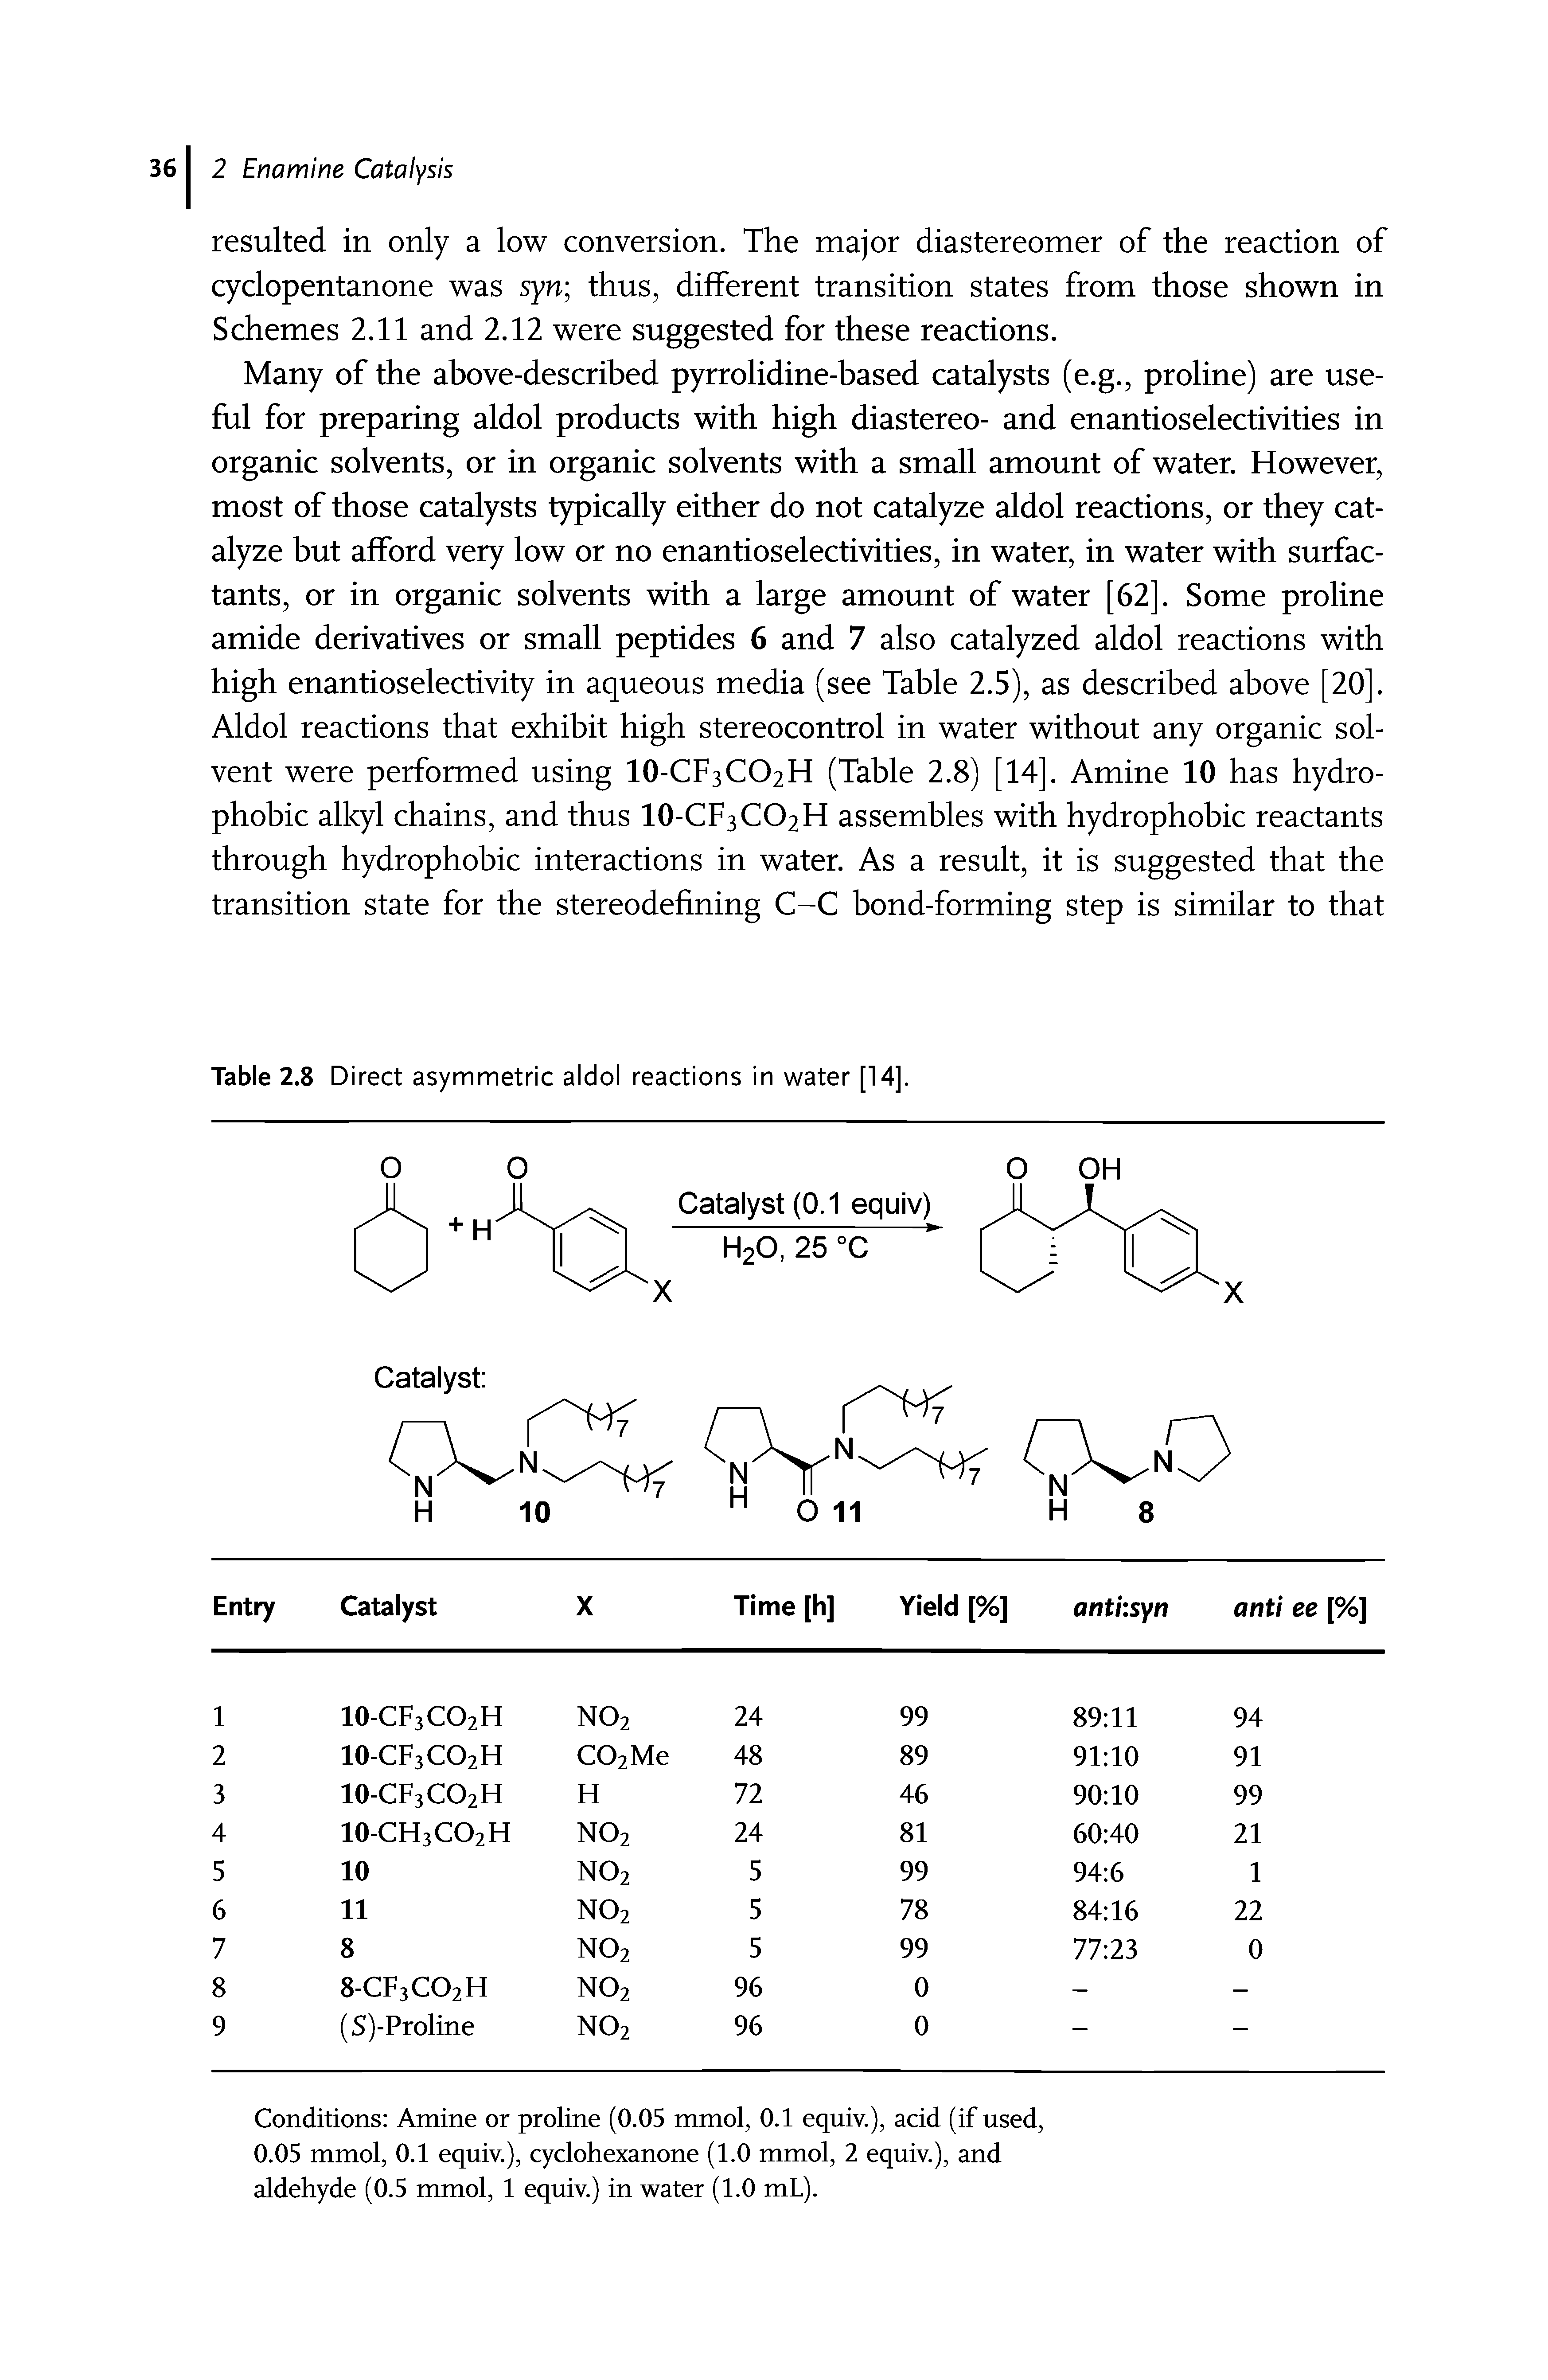 Table 2.8 Direct asymmetric aldol reactions in water [14].